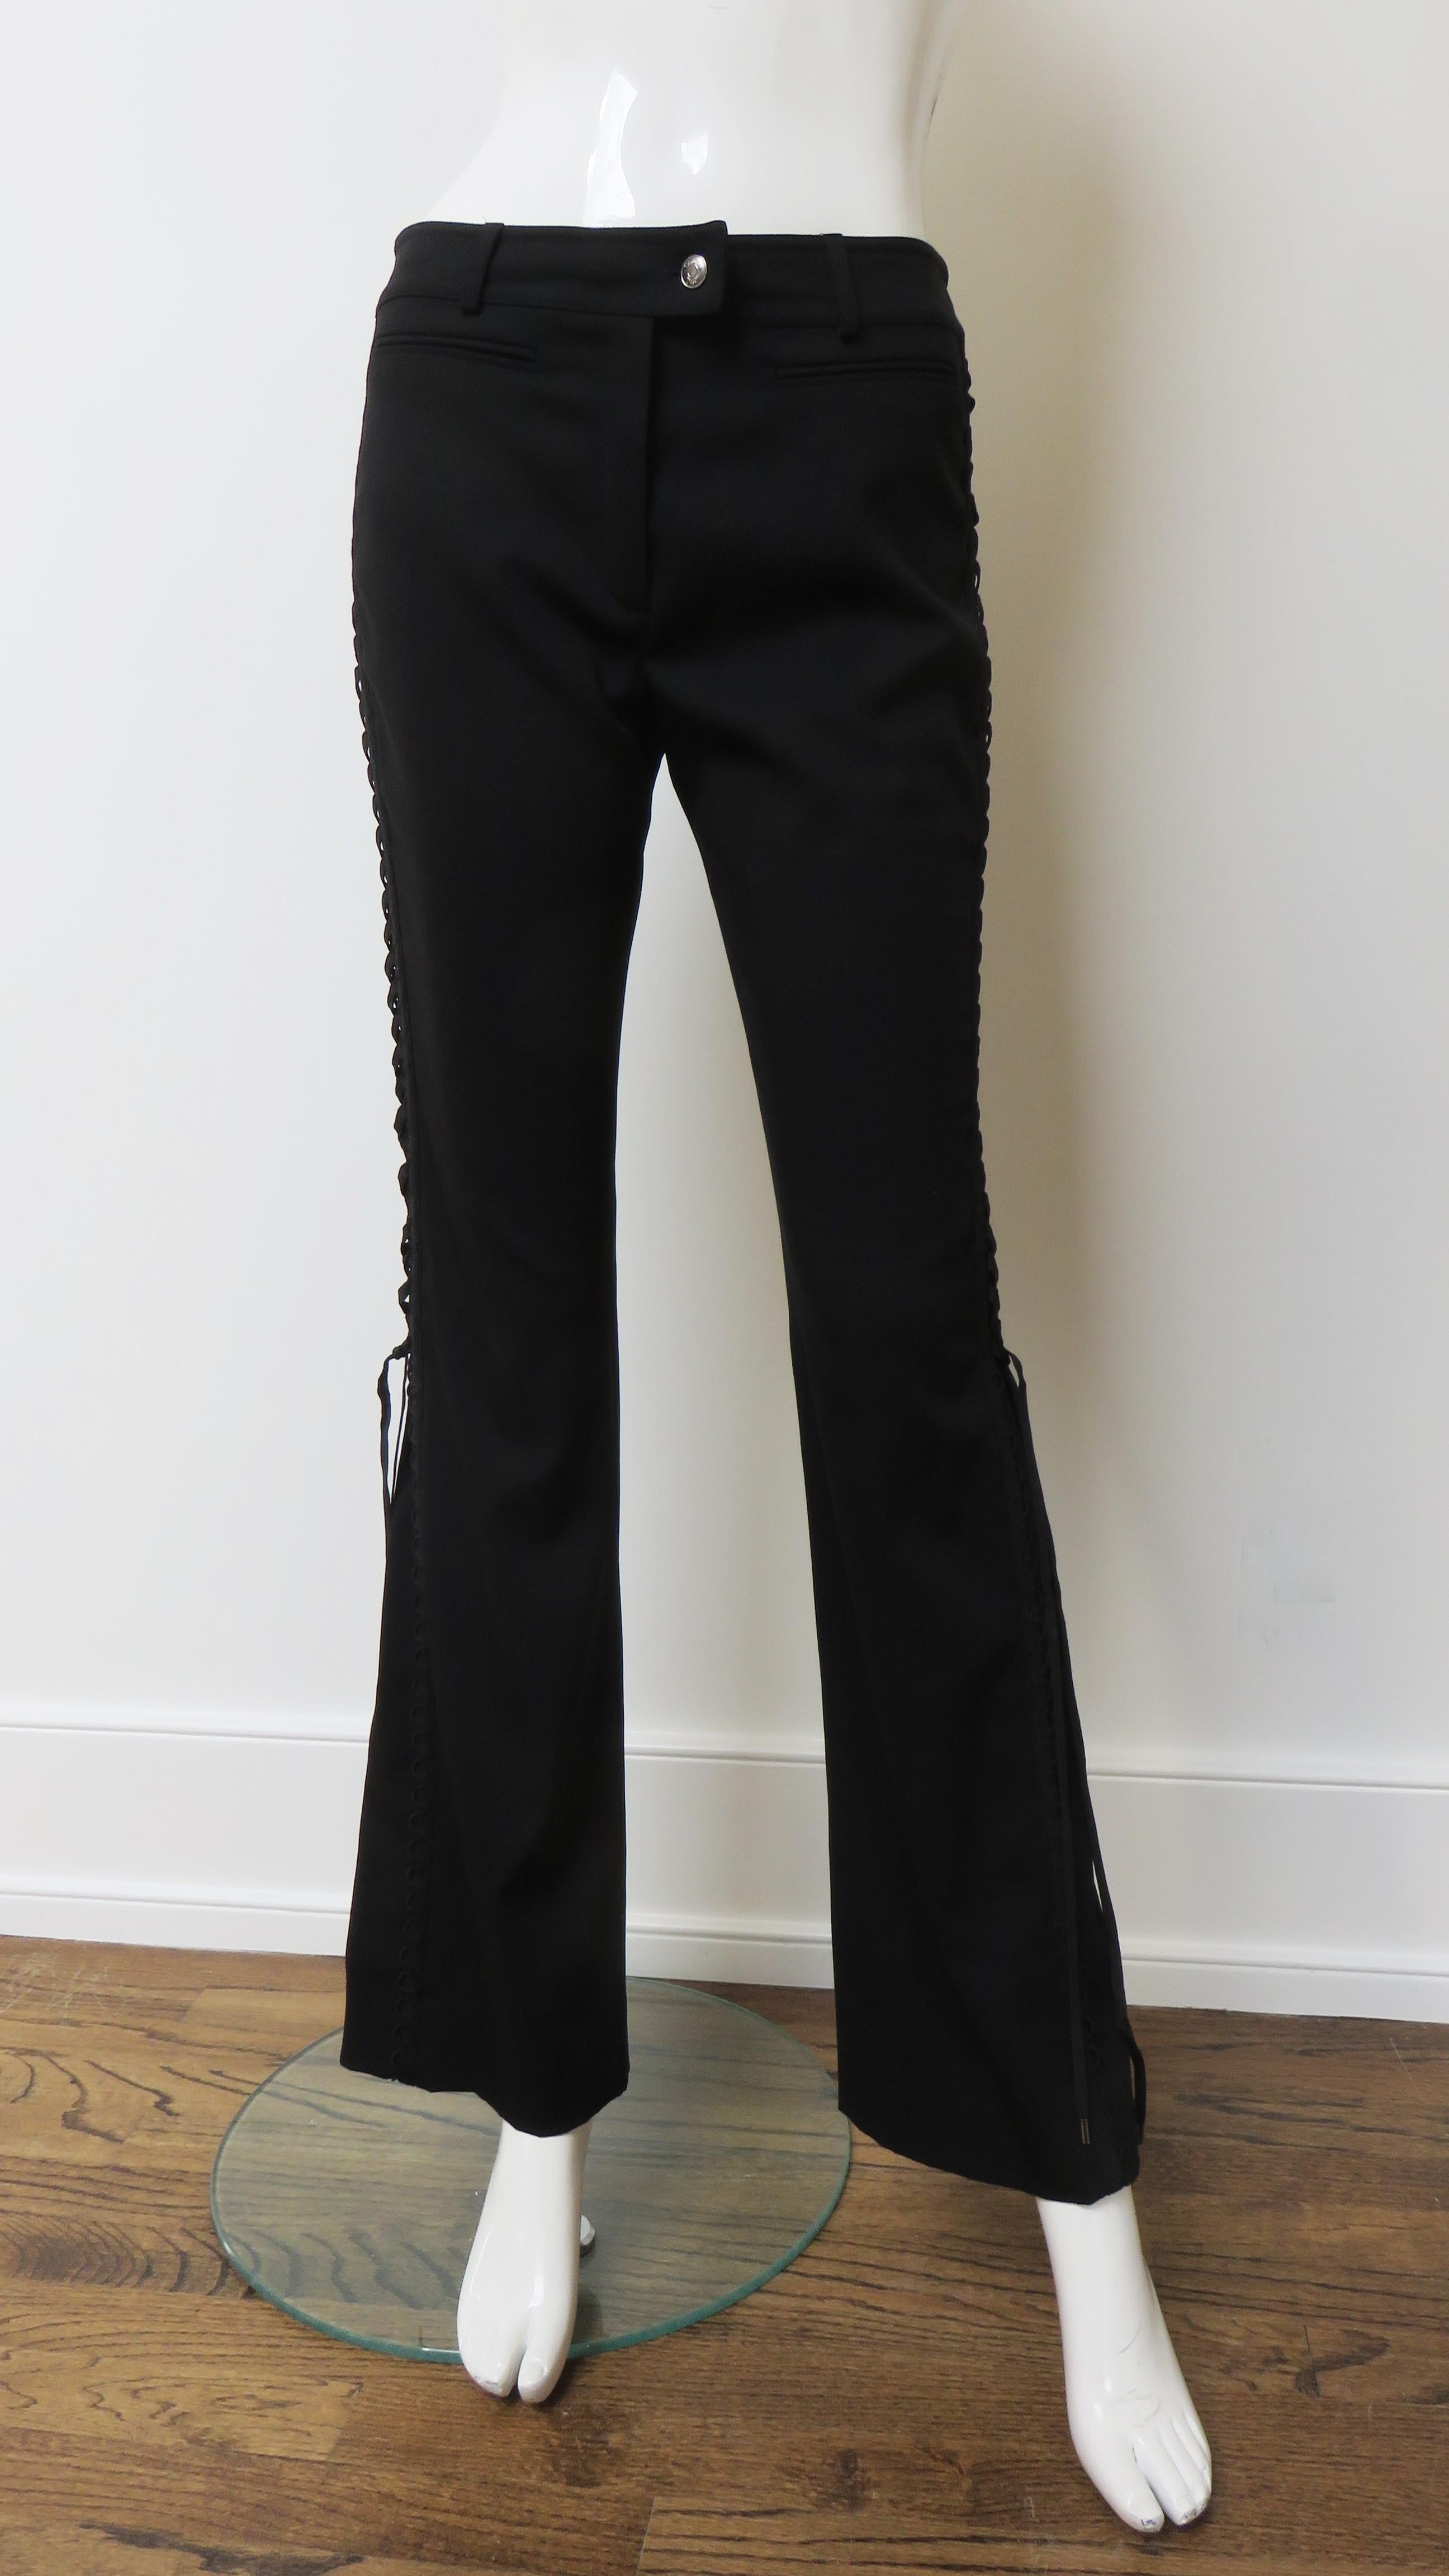 Fabulous black light weight wool pants with a bit of stretch from John Galliano for Christian Dior.  They are mid rise with front welt pockets and a silver metal Christian Dior inscribed front button on the waistband above a zipper closing.  The